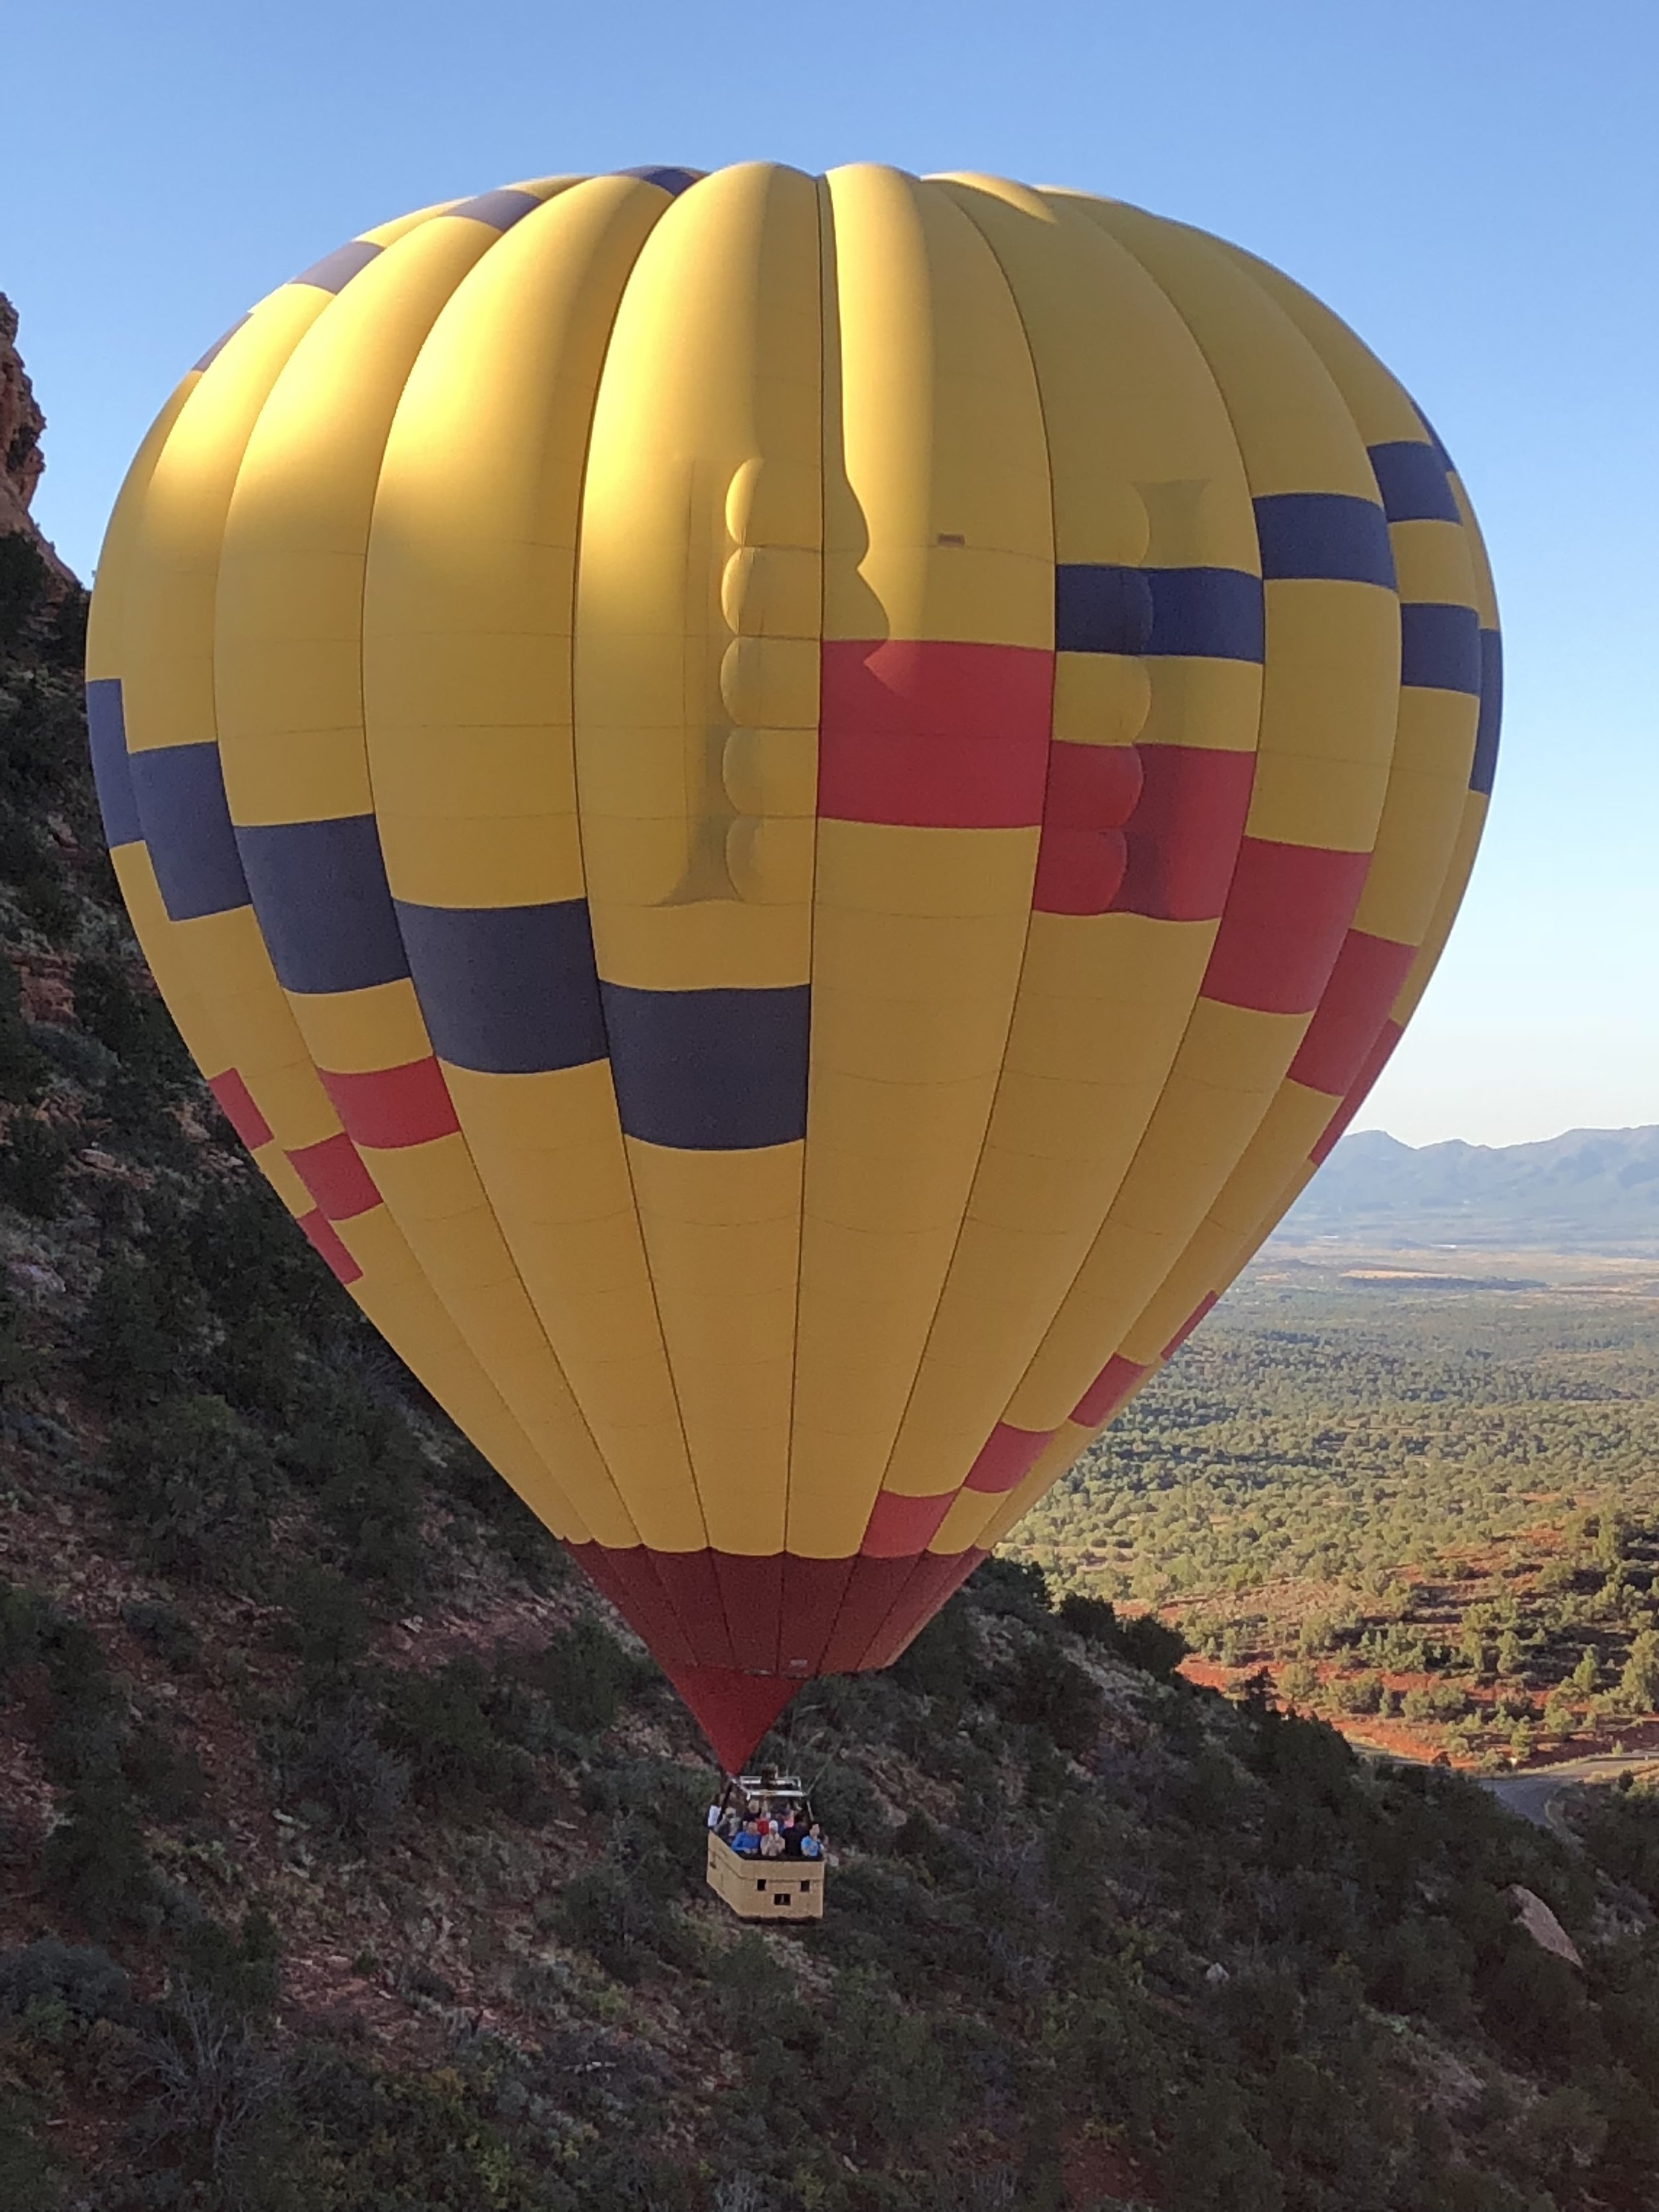  Special thanks to the woman who took these photos and sent them to me after my phone died on the hot air balloon. I wish I could remember her name! 